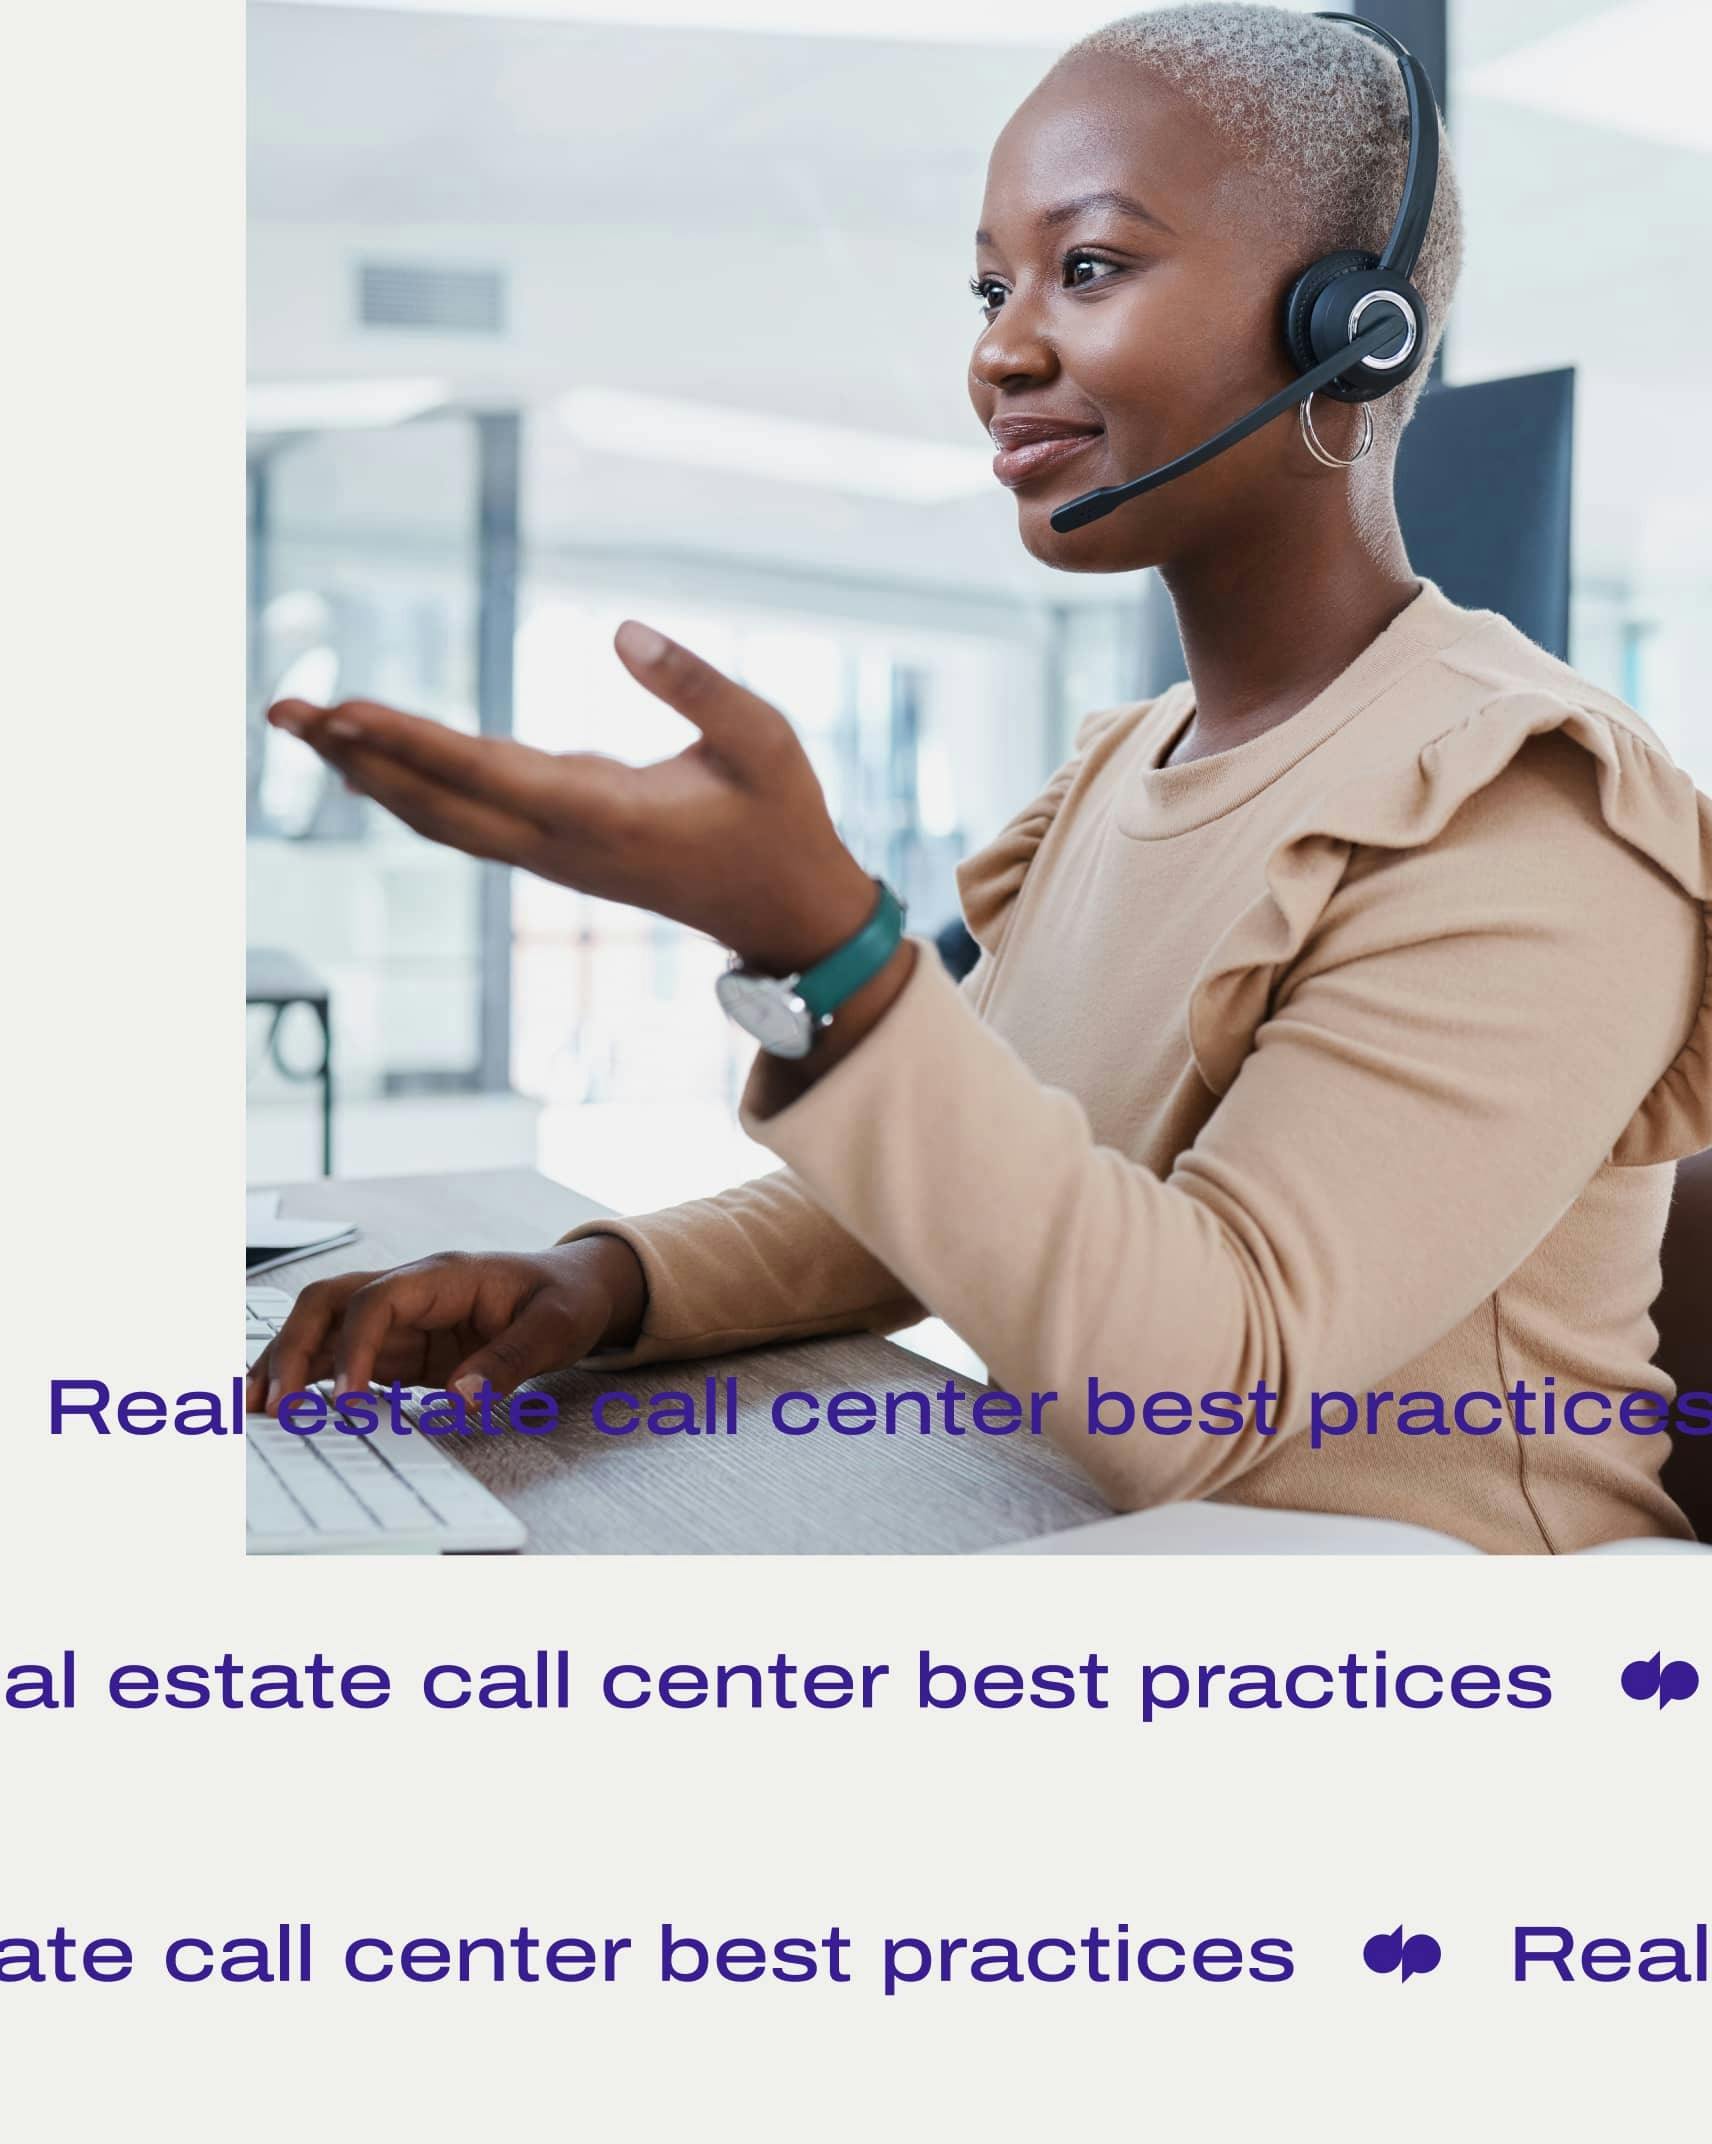 Real estate call center best practices